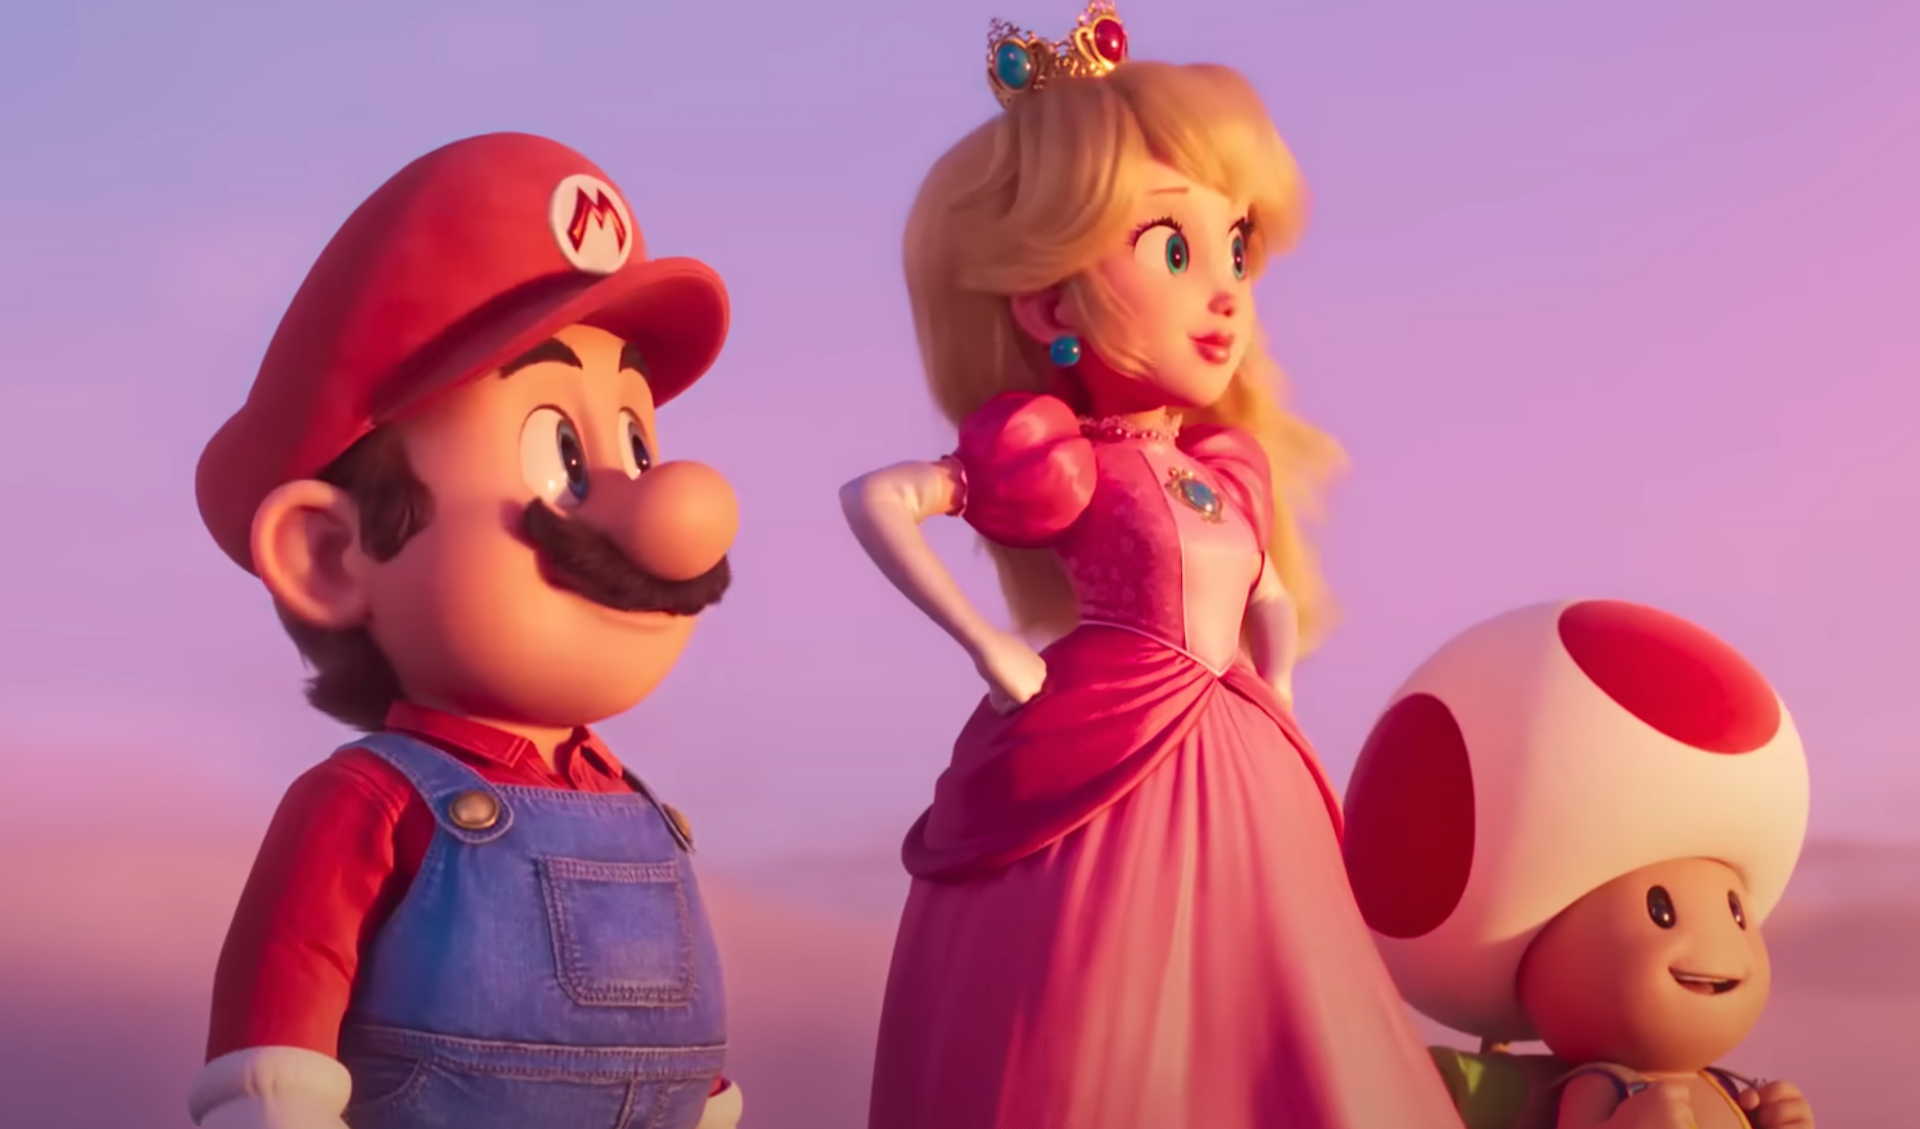 Mario and Luigi face off against Bowser once again in the animated film 'The Super Mario Bros. Movie,' which will bring your childhood to the big screen in 2023.